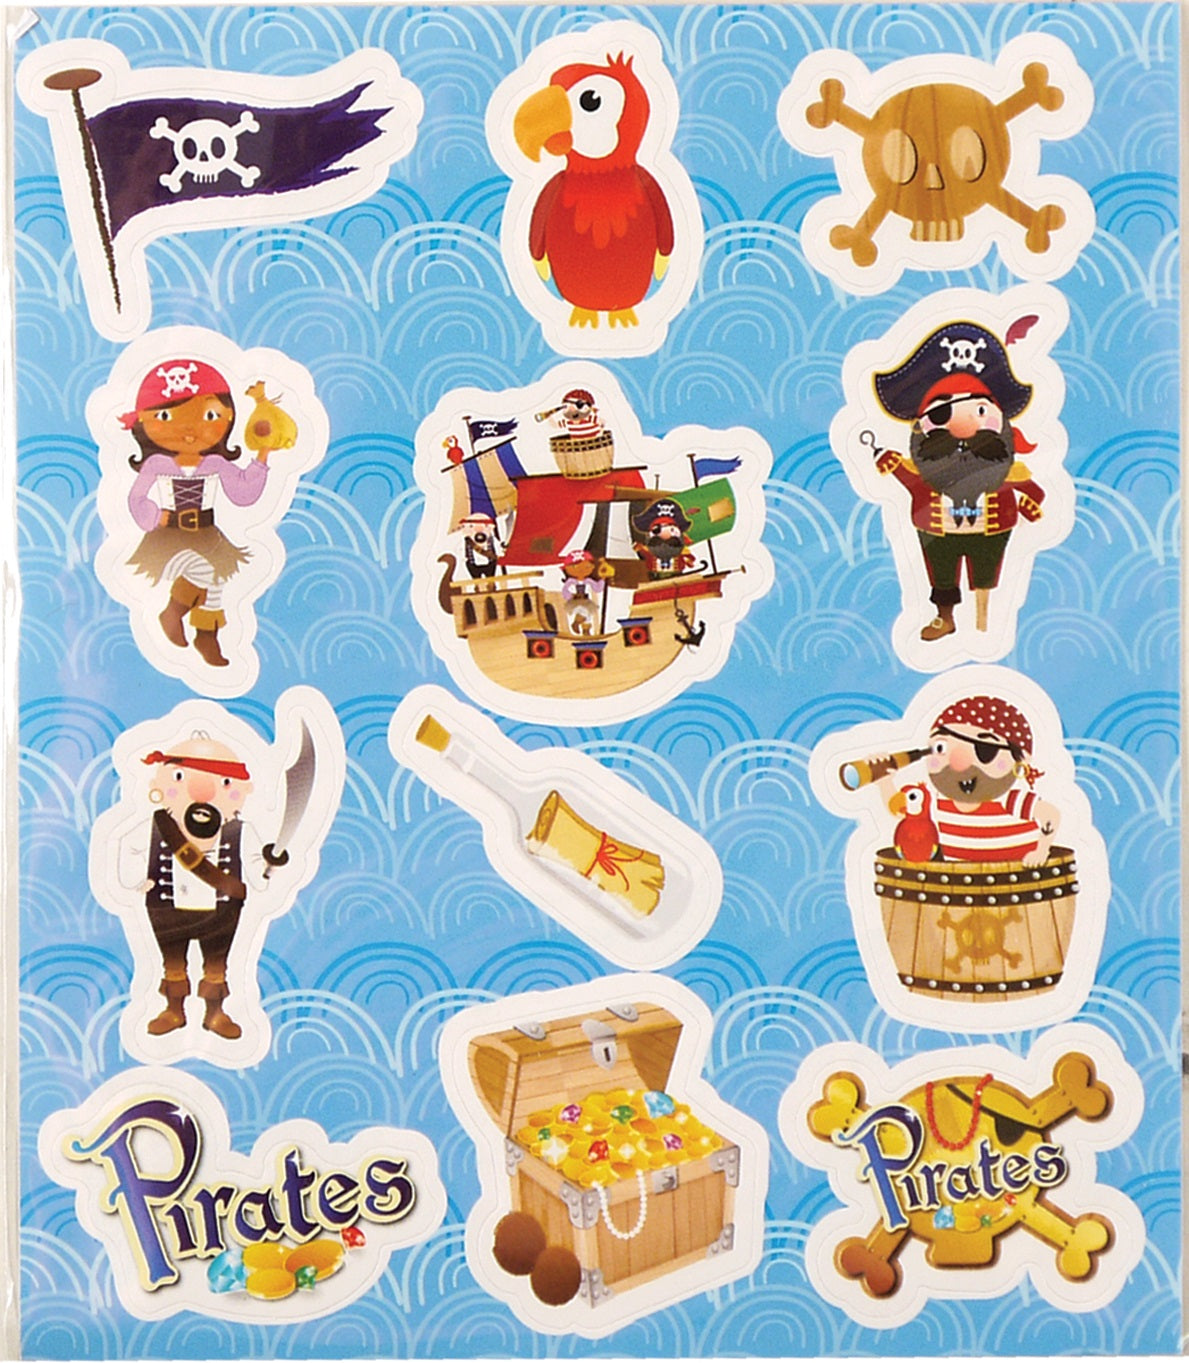 12 Pirate Stickers for Party Bags